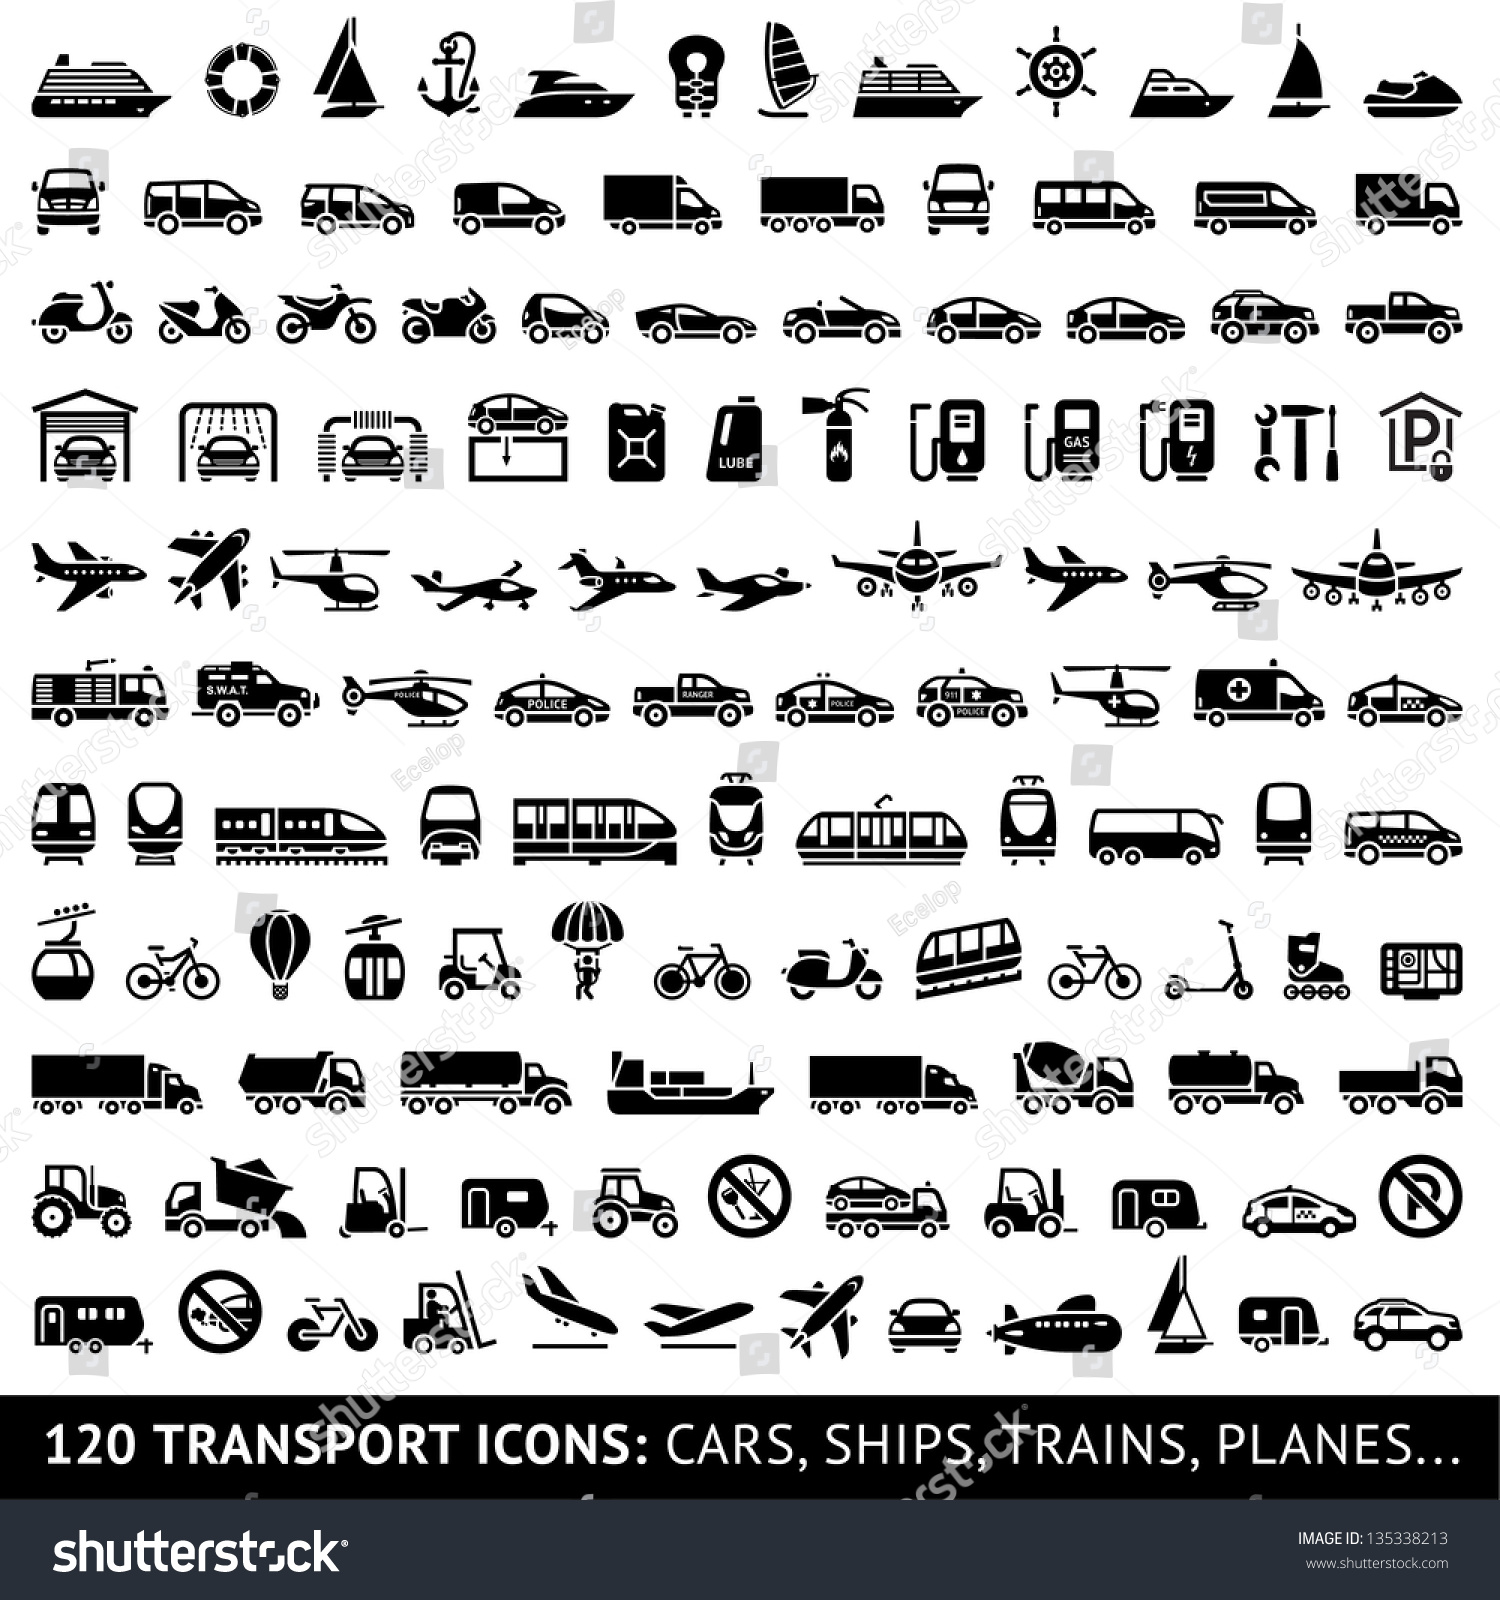 SVG of 120 Transport icons: Cars, Ships, Trains, Planes, vector illustrations, set silhouettes isolated on white background. svg